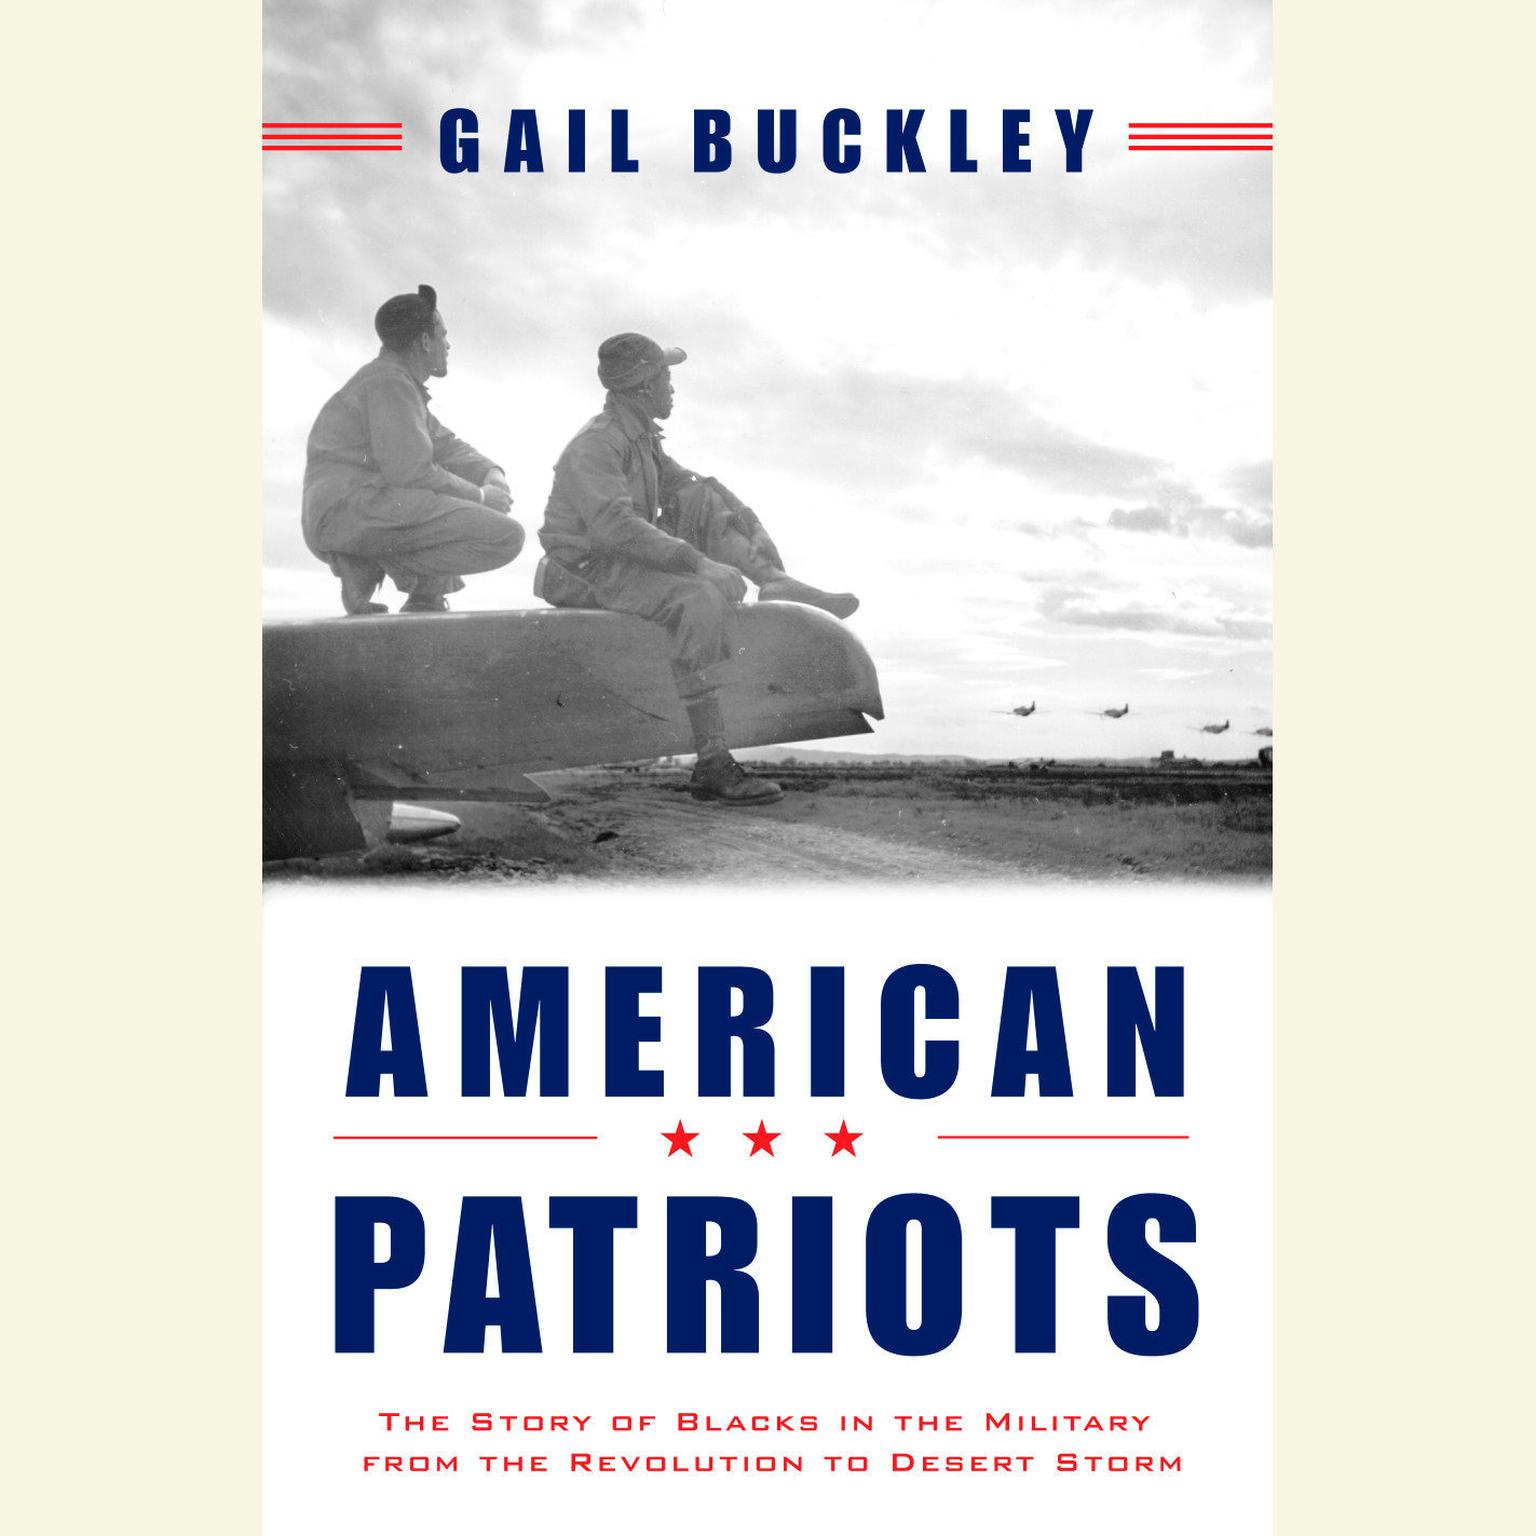 American Patriots: The Story of Blacks in the Military From the Revolution to Desert Storm (PART 1 OF 1) Audiobook, by Gail Buckley